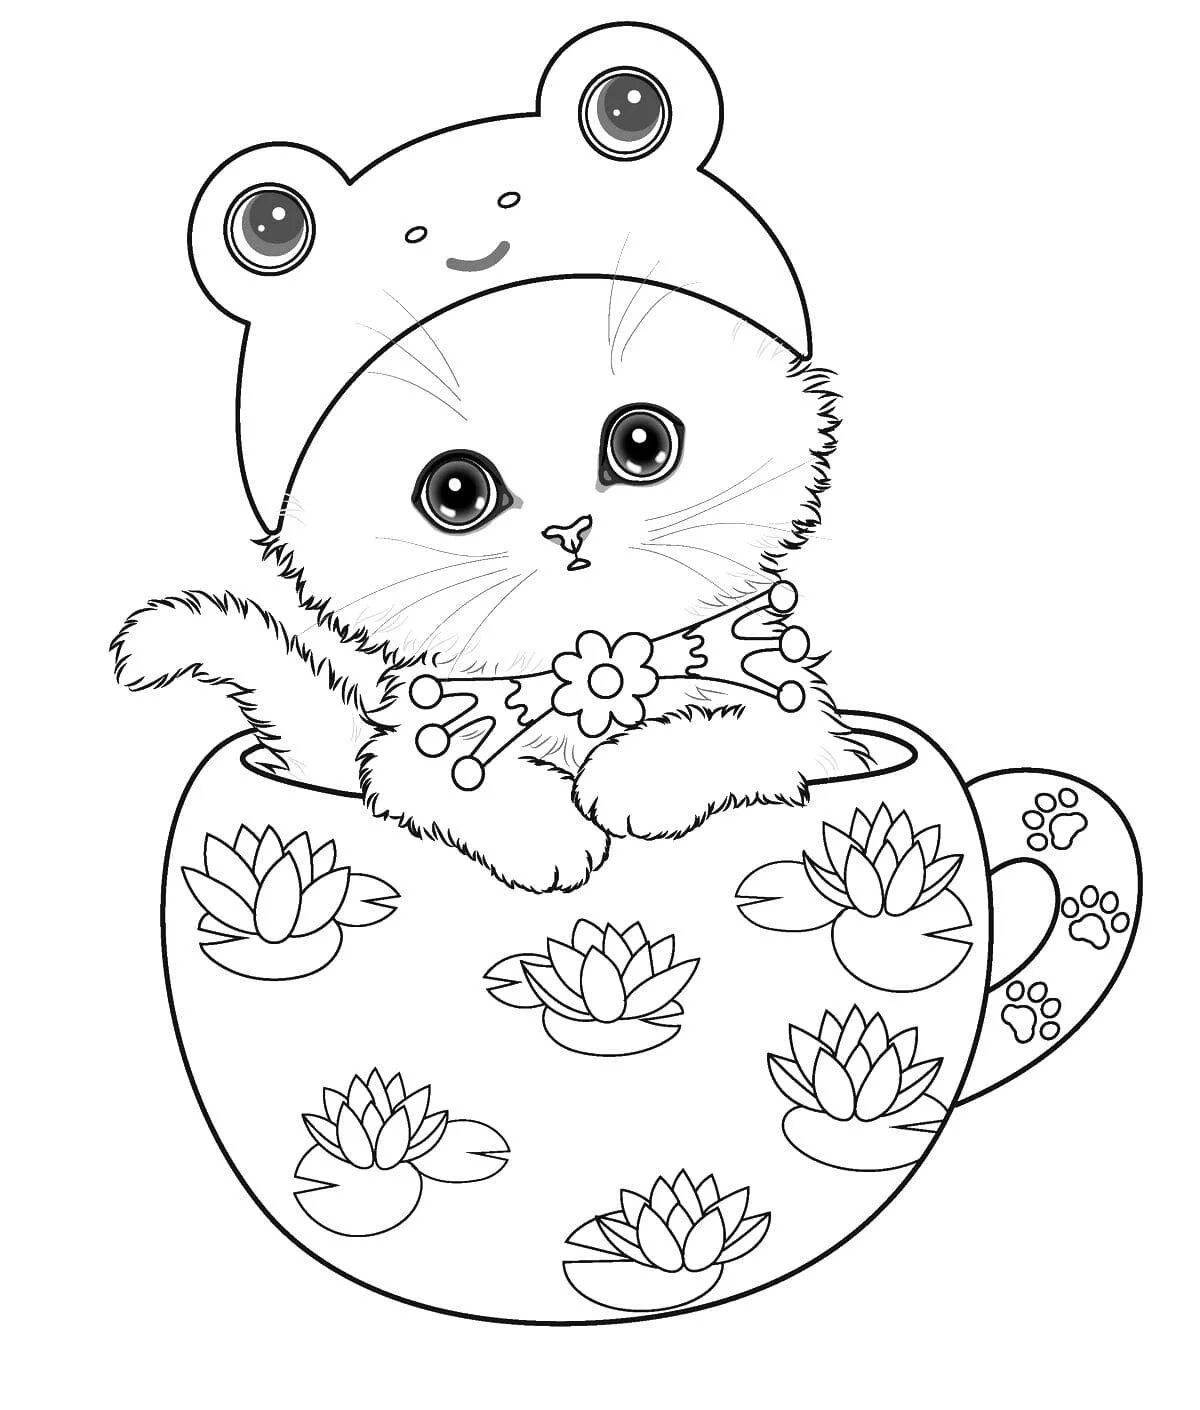 Coloring page quirky kitten in a cup